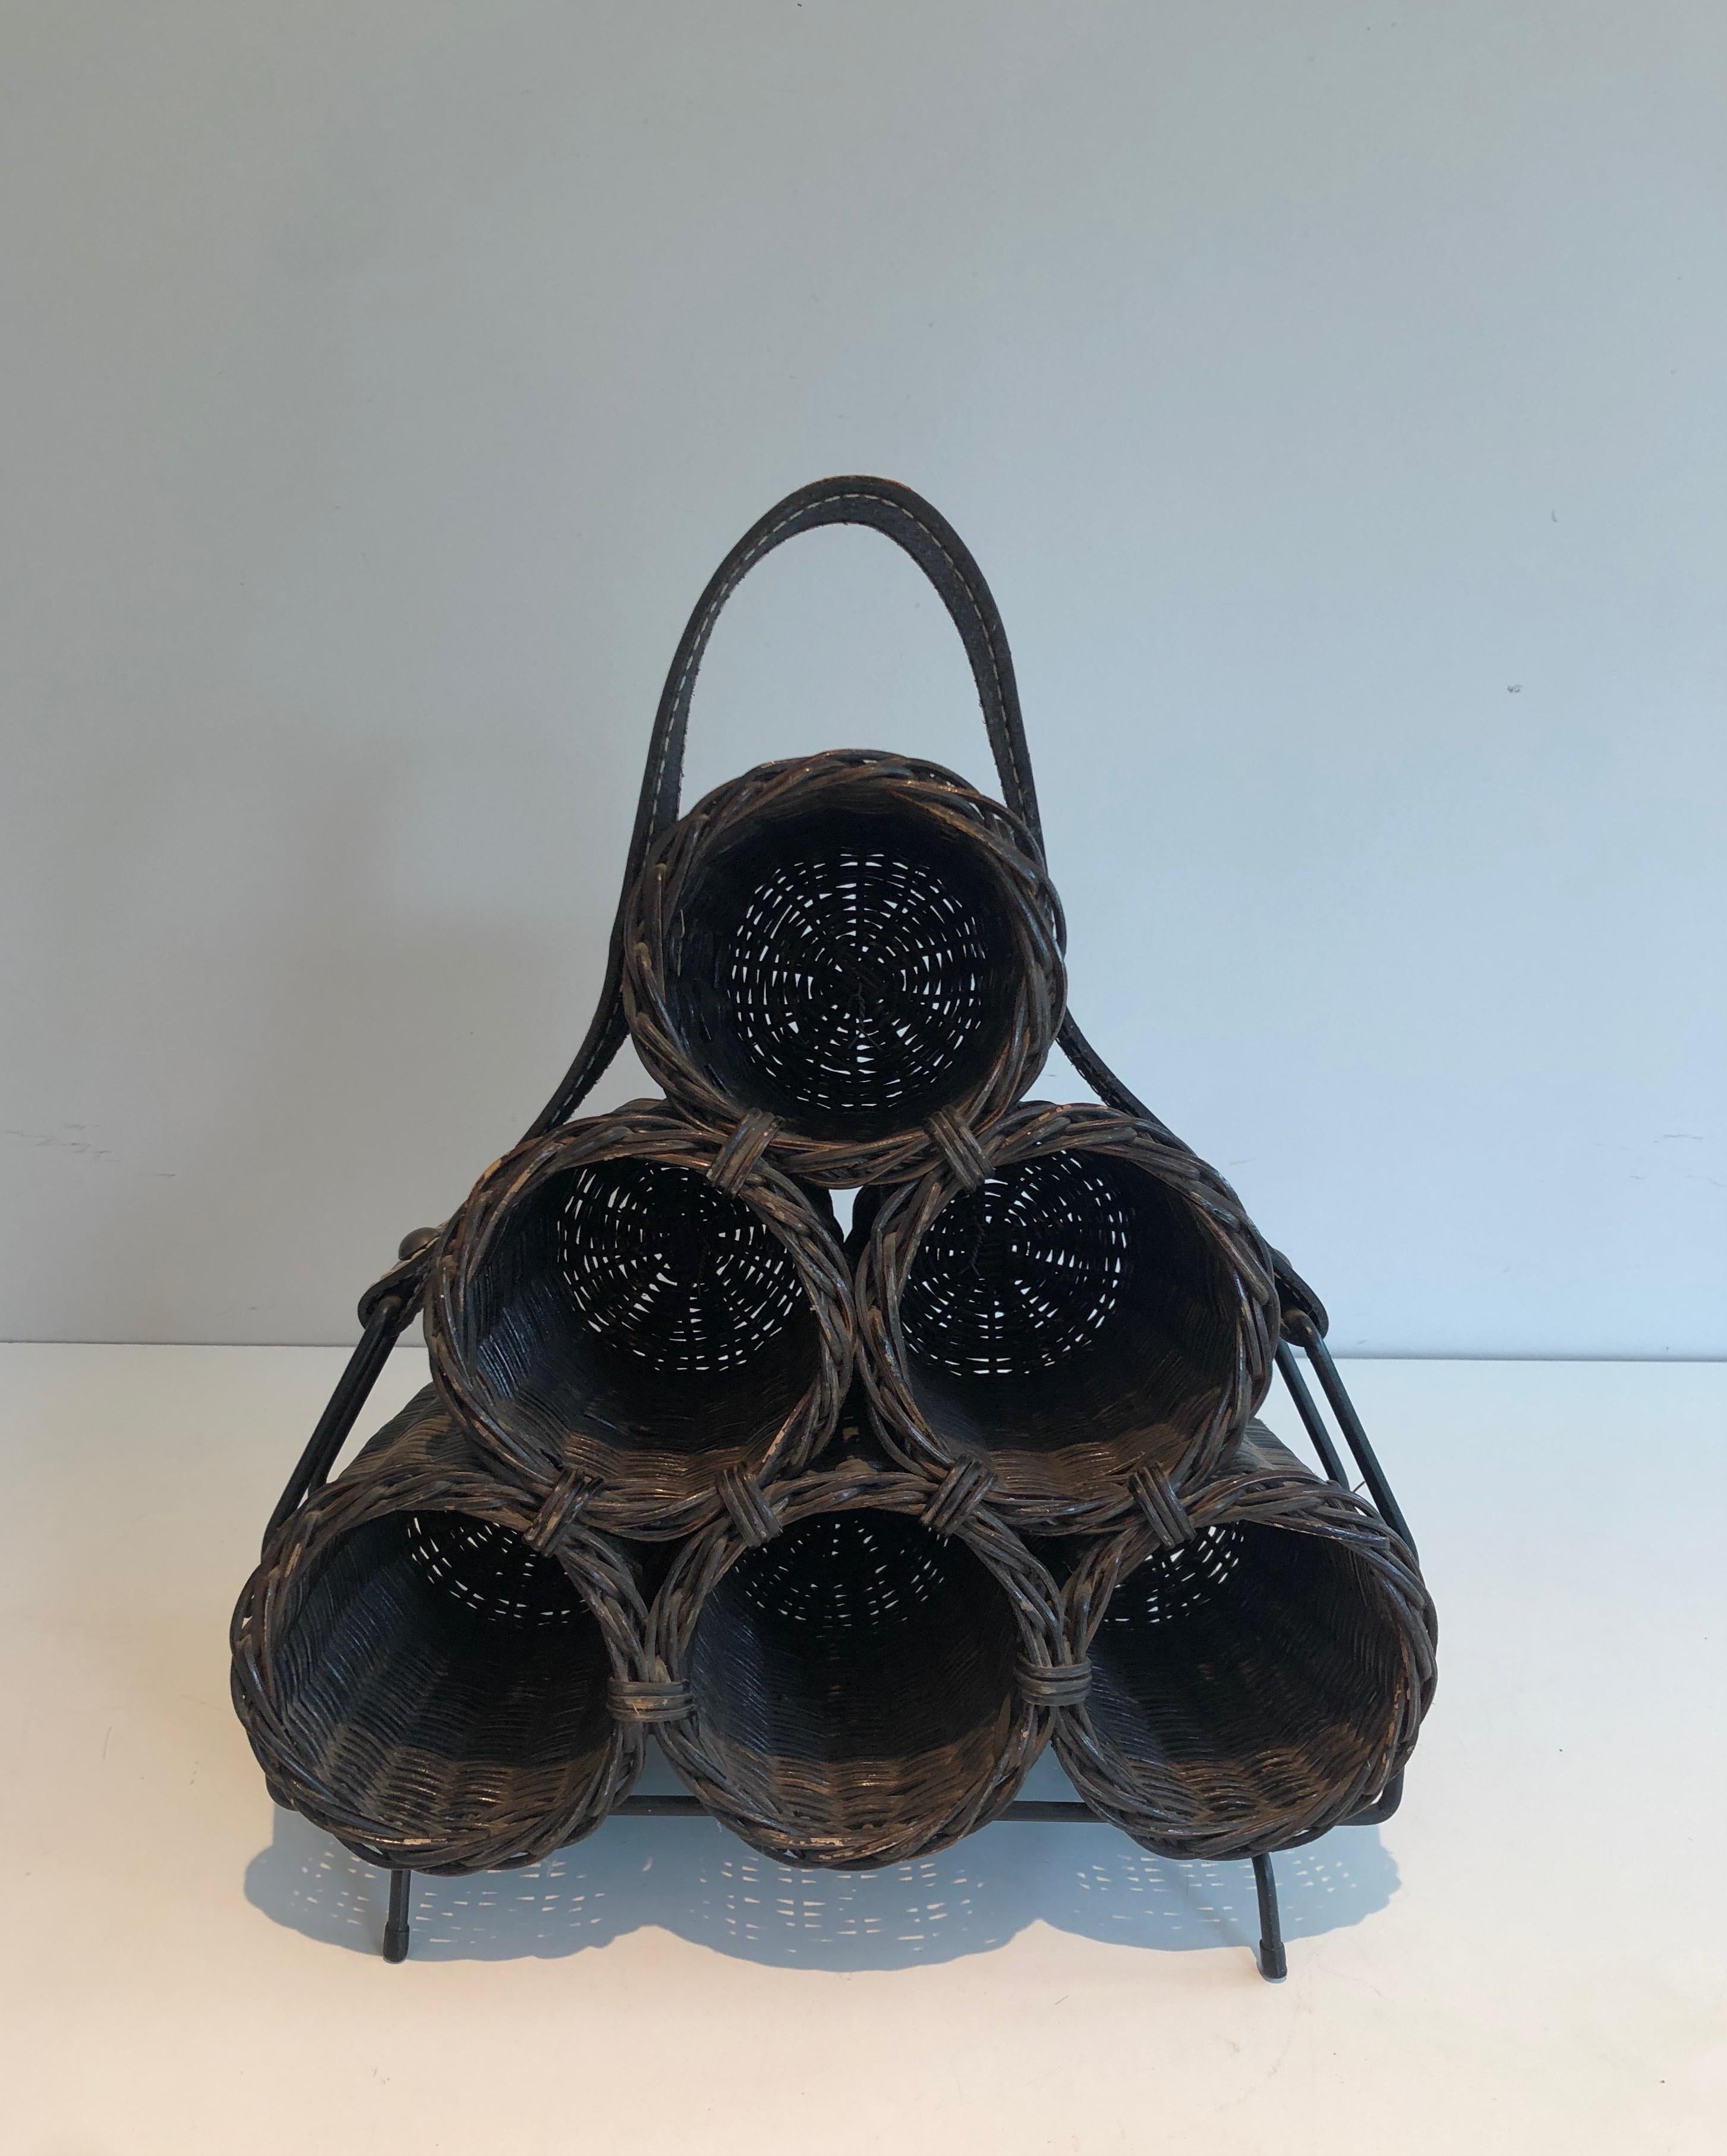 This bottles holder is made of rattan and leather. This is a French Work. Circa 1970.